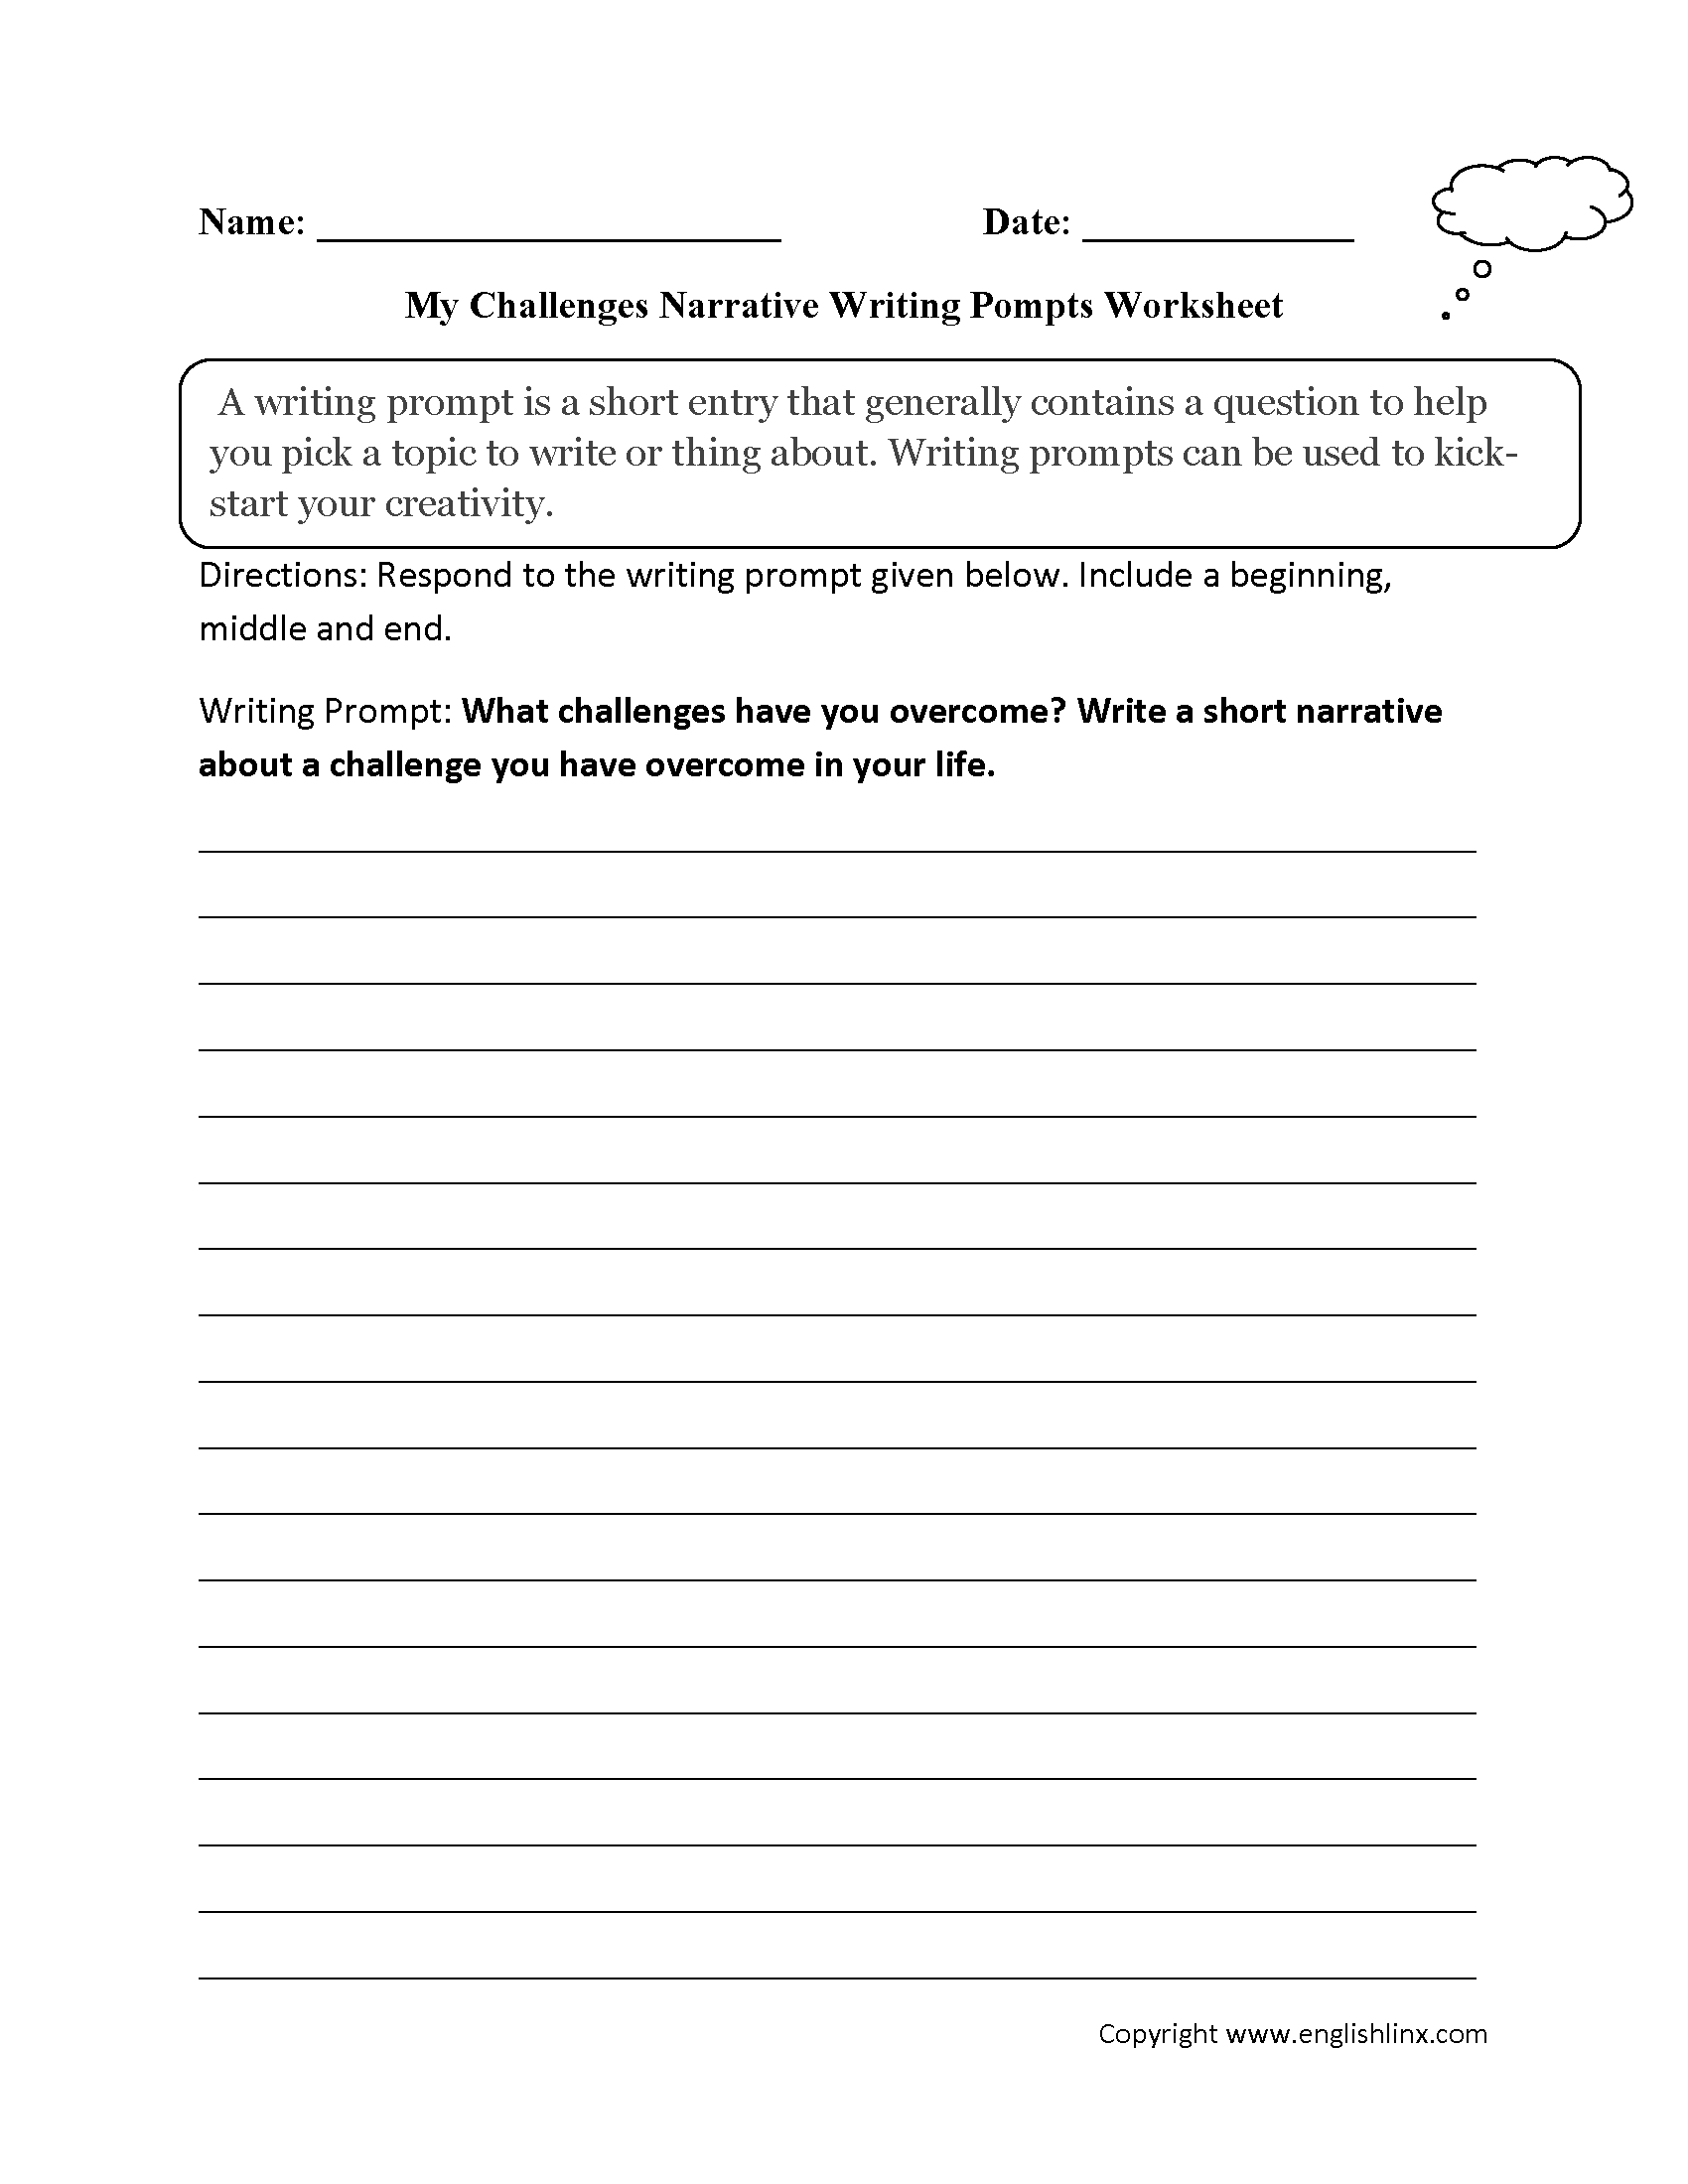 Overcoming Challenges Narrative Writing Prompt Worksheet